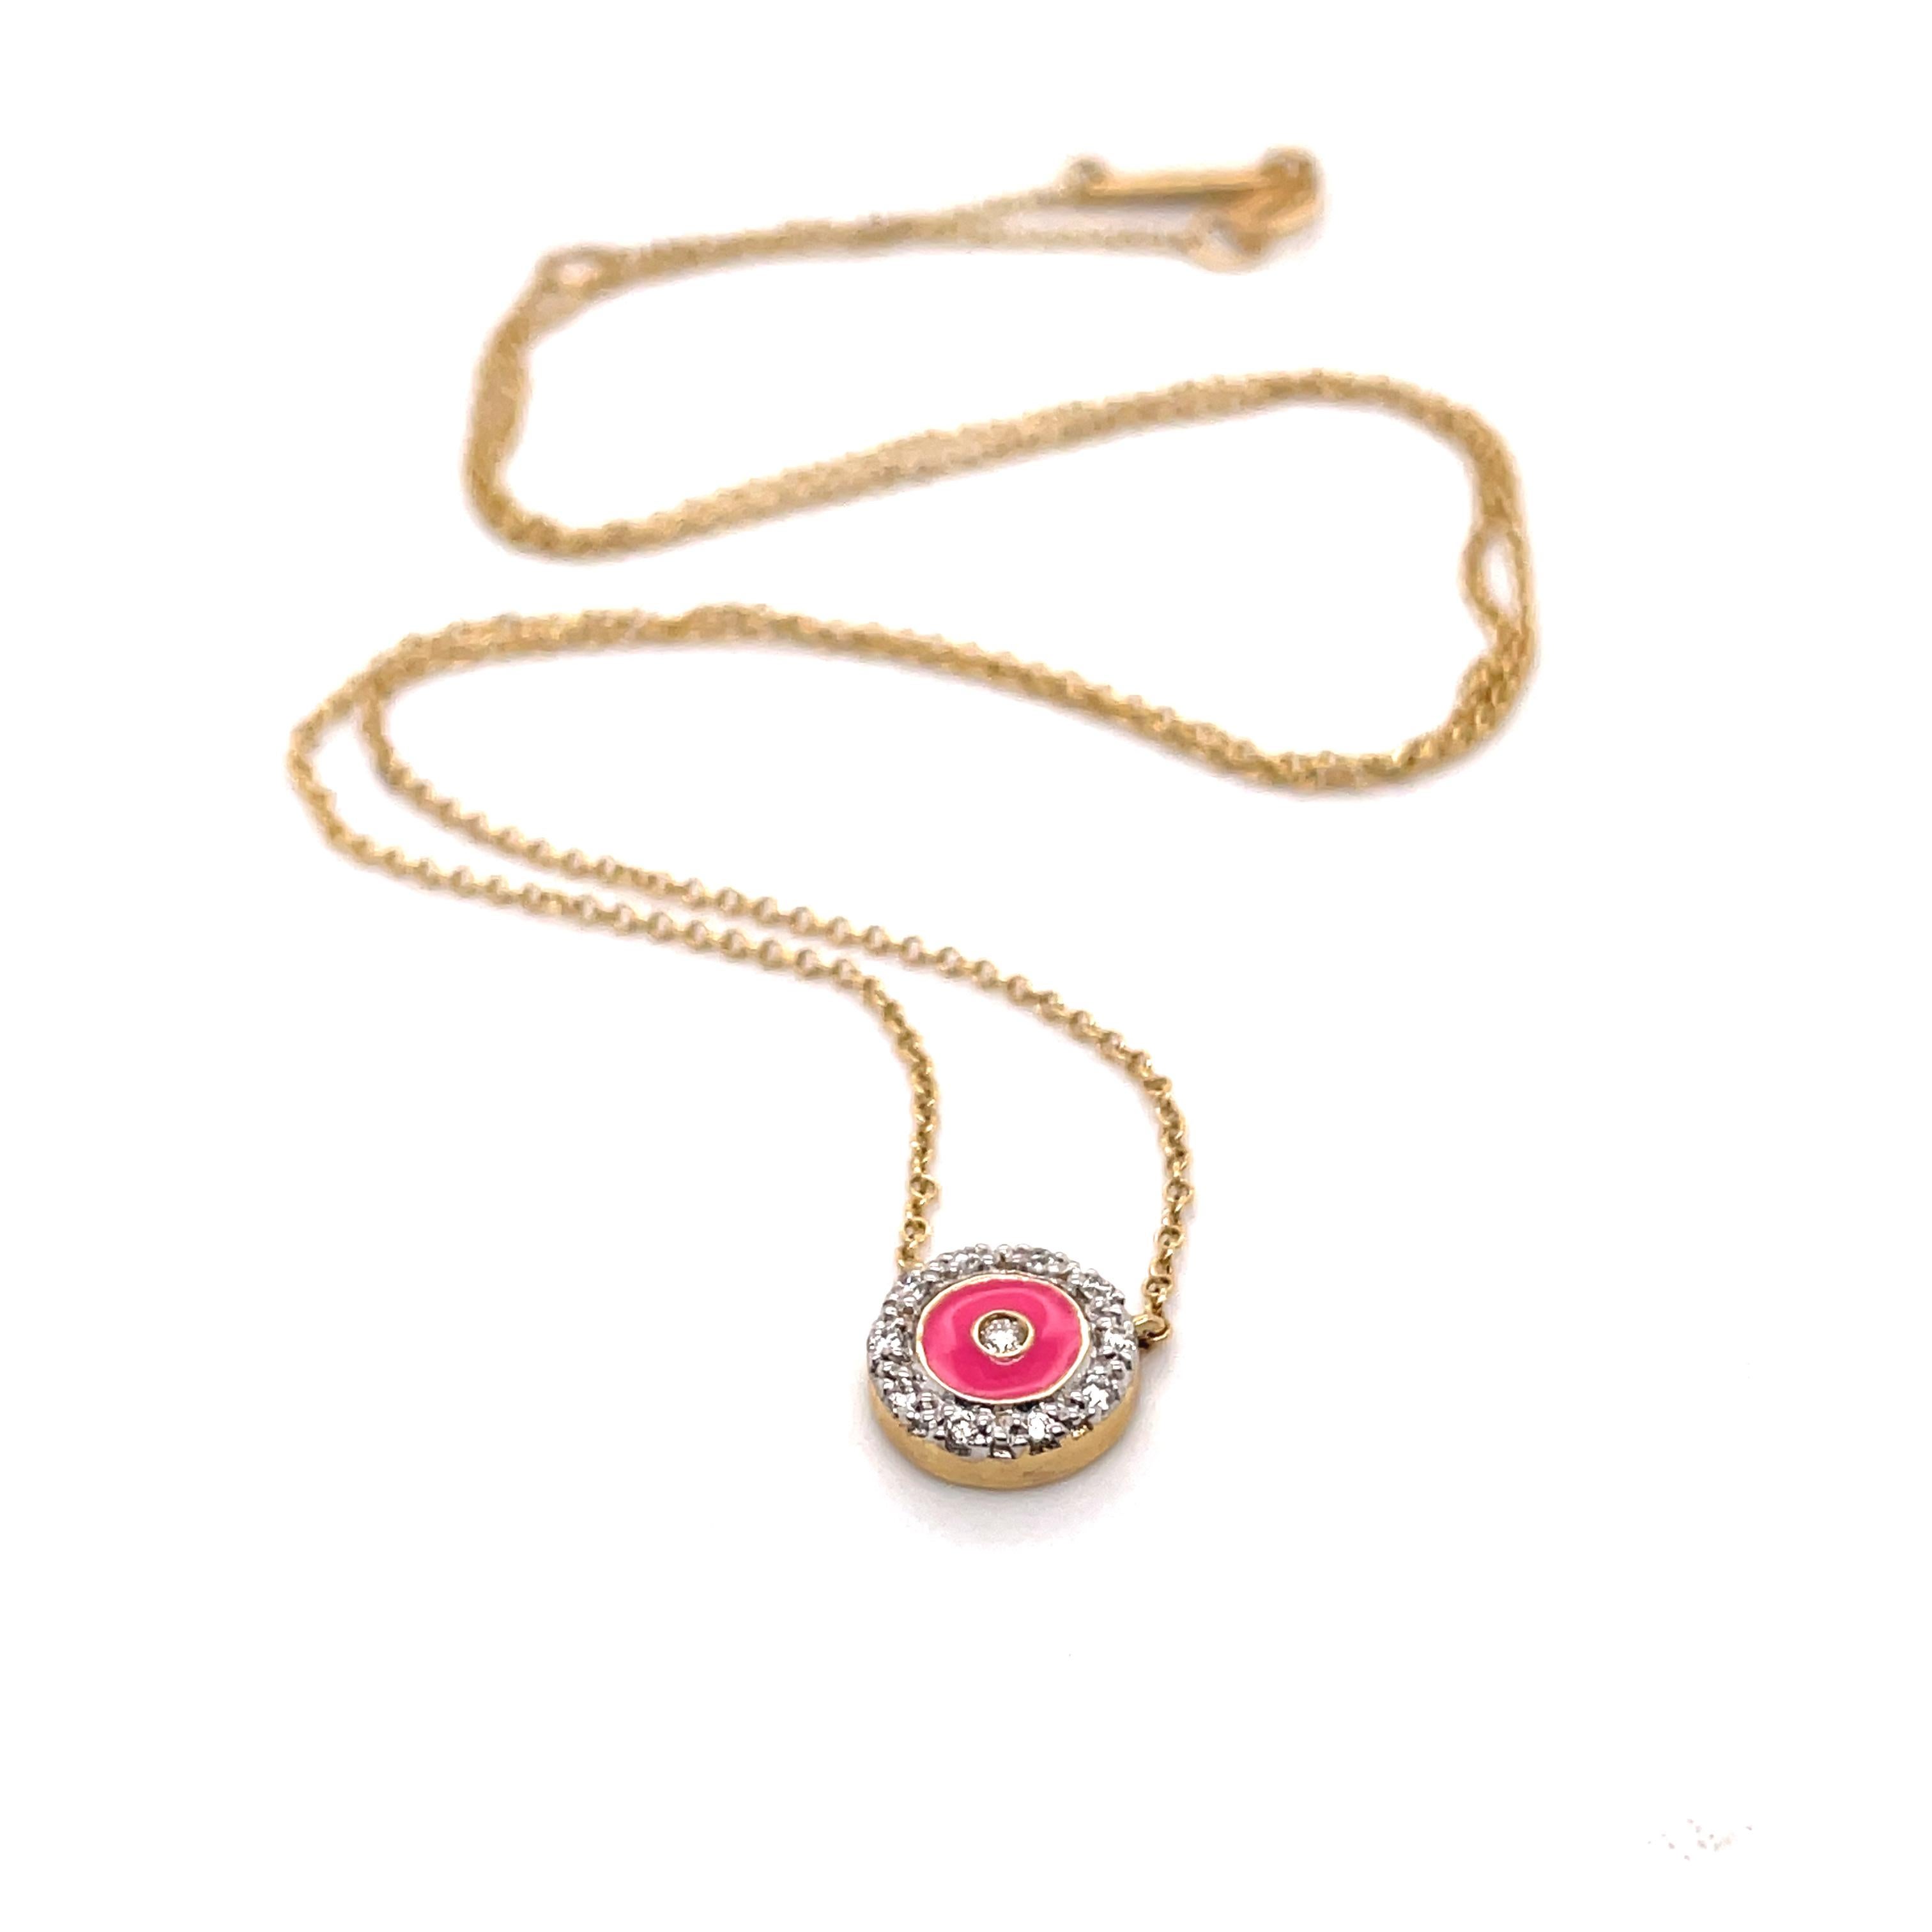 Jewelry Yellow Gold 14k  + Enamel (the gold has been tested by a professional)
Total Carat Weight:0.07ct (Approx.)
Total Metal Weight: 2.14 g
Size: Pendant: Pendant: 8.2 x 8.2 mm
                         Necklace: 45 cm                              